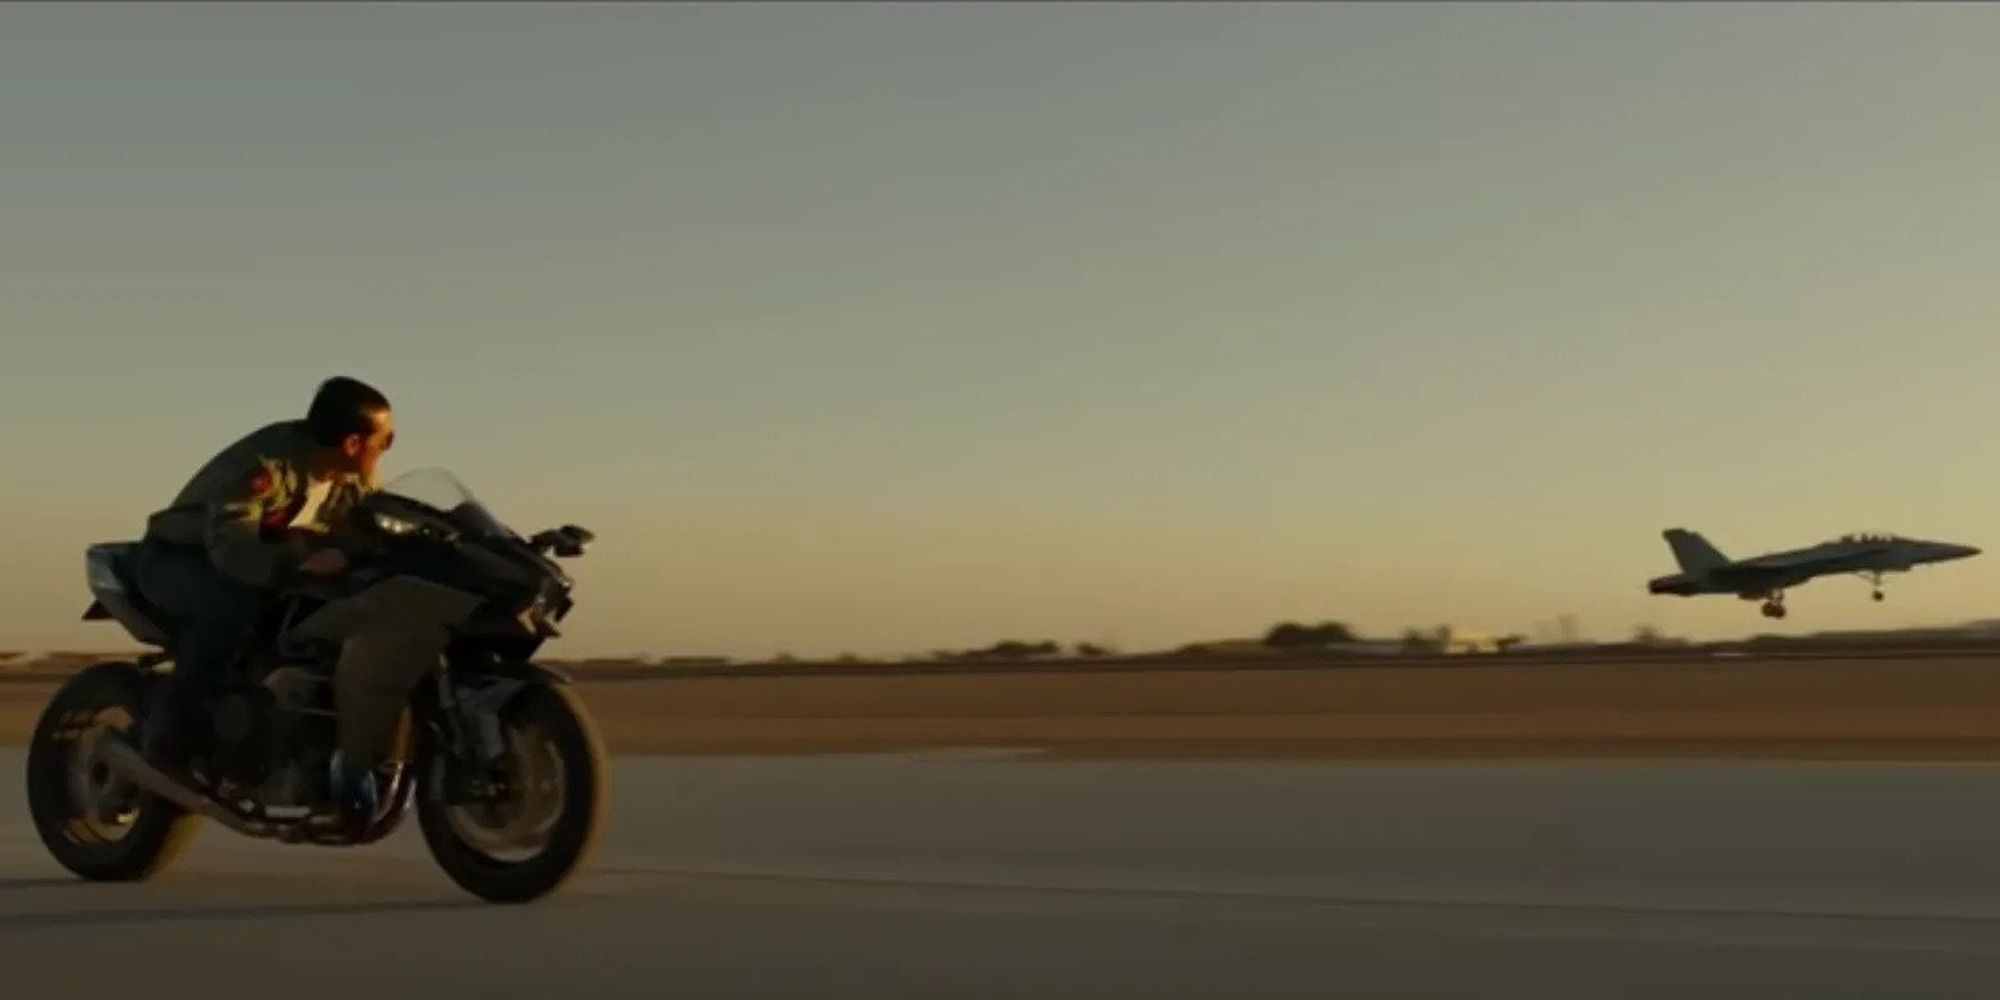 Maverick from Top Gun: Maverick, racing against a plane with his motorcycle